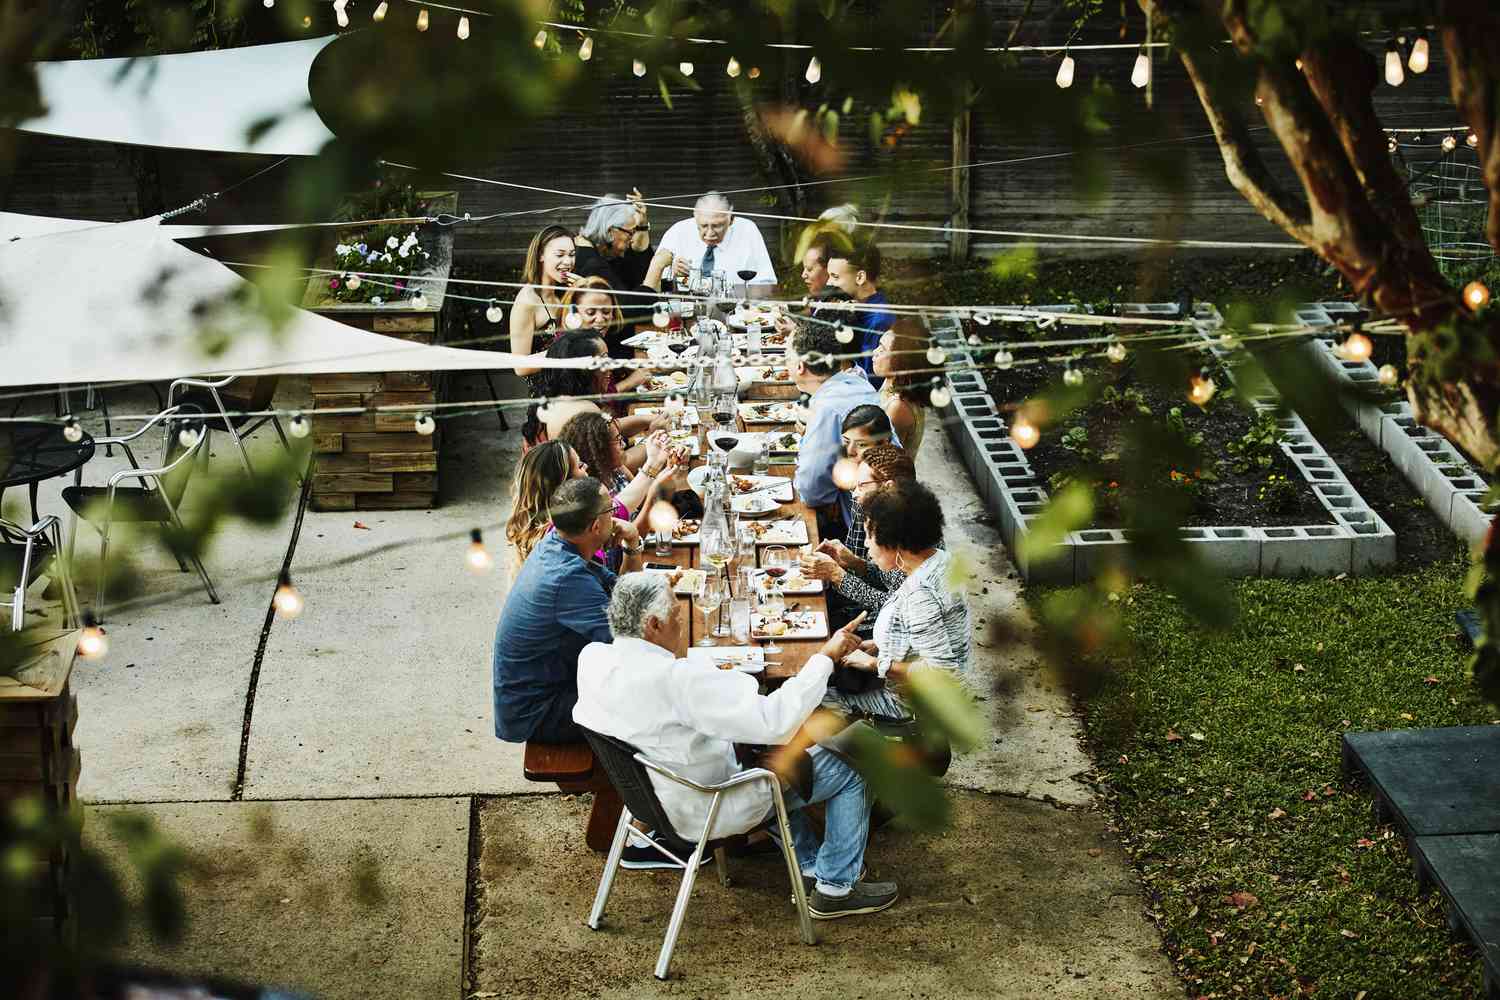 Overhead view of family seated together on outdoor patio for celebration dinner